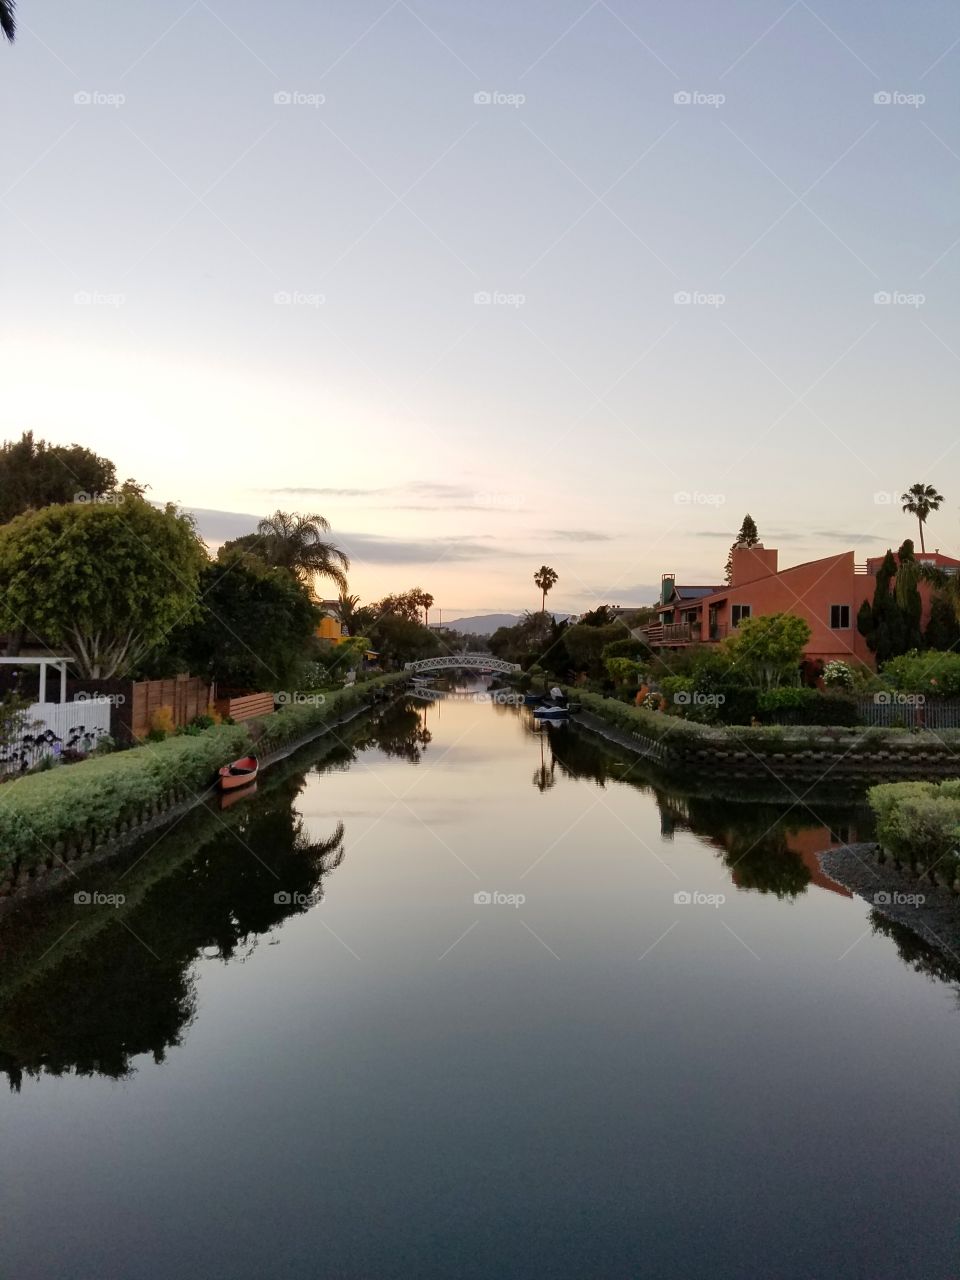 Venice Canals at Sunset